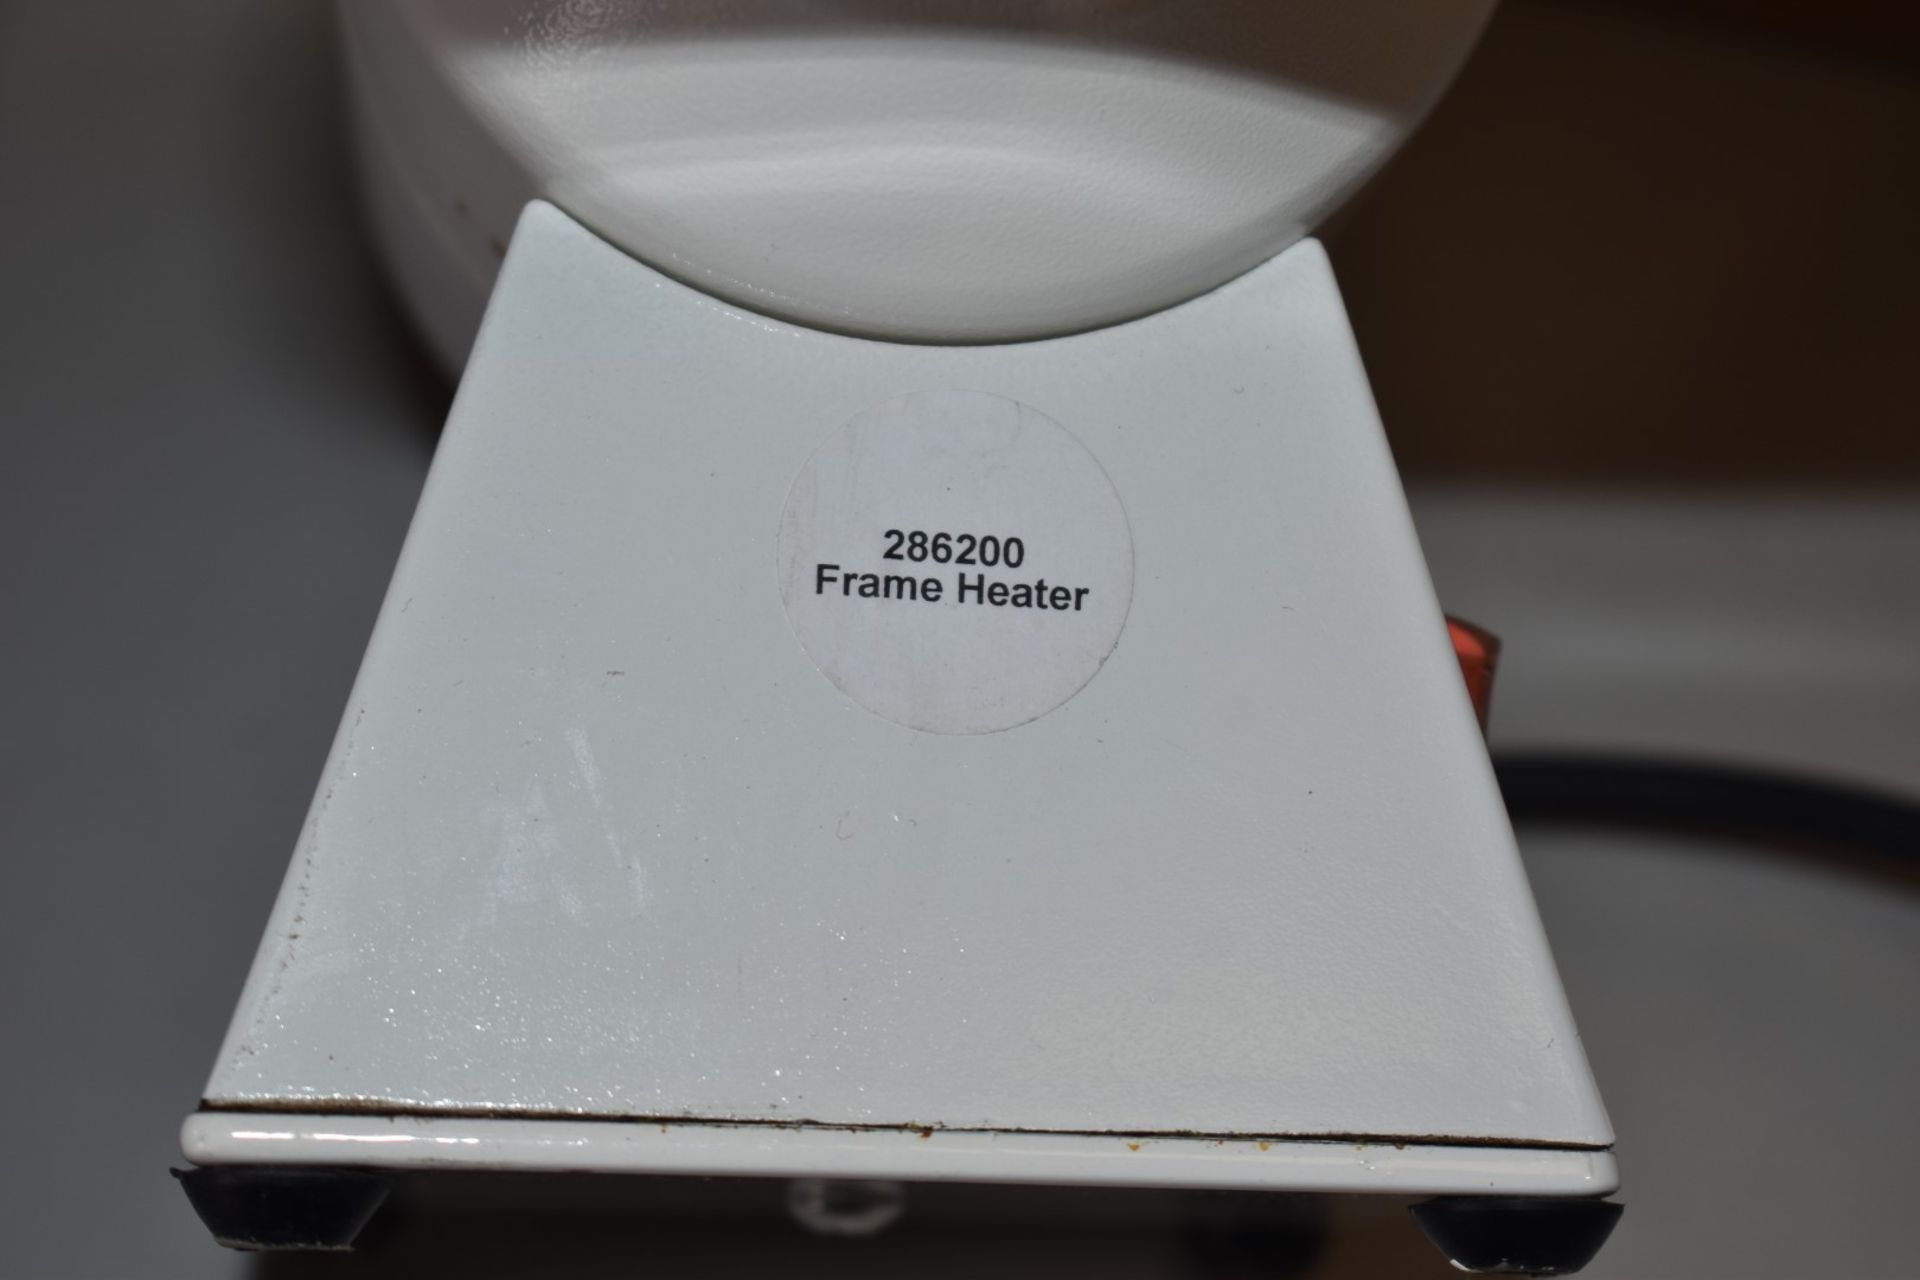 1 x Spectacle Frame Heater - Model 286200 - Suitable For Countertop Use - Ref: GTI142 - CL645 - - Image 4 of 5